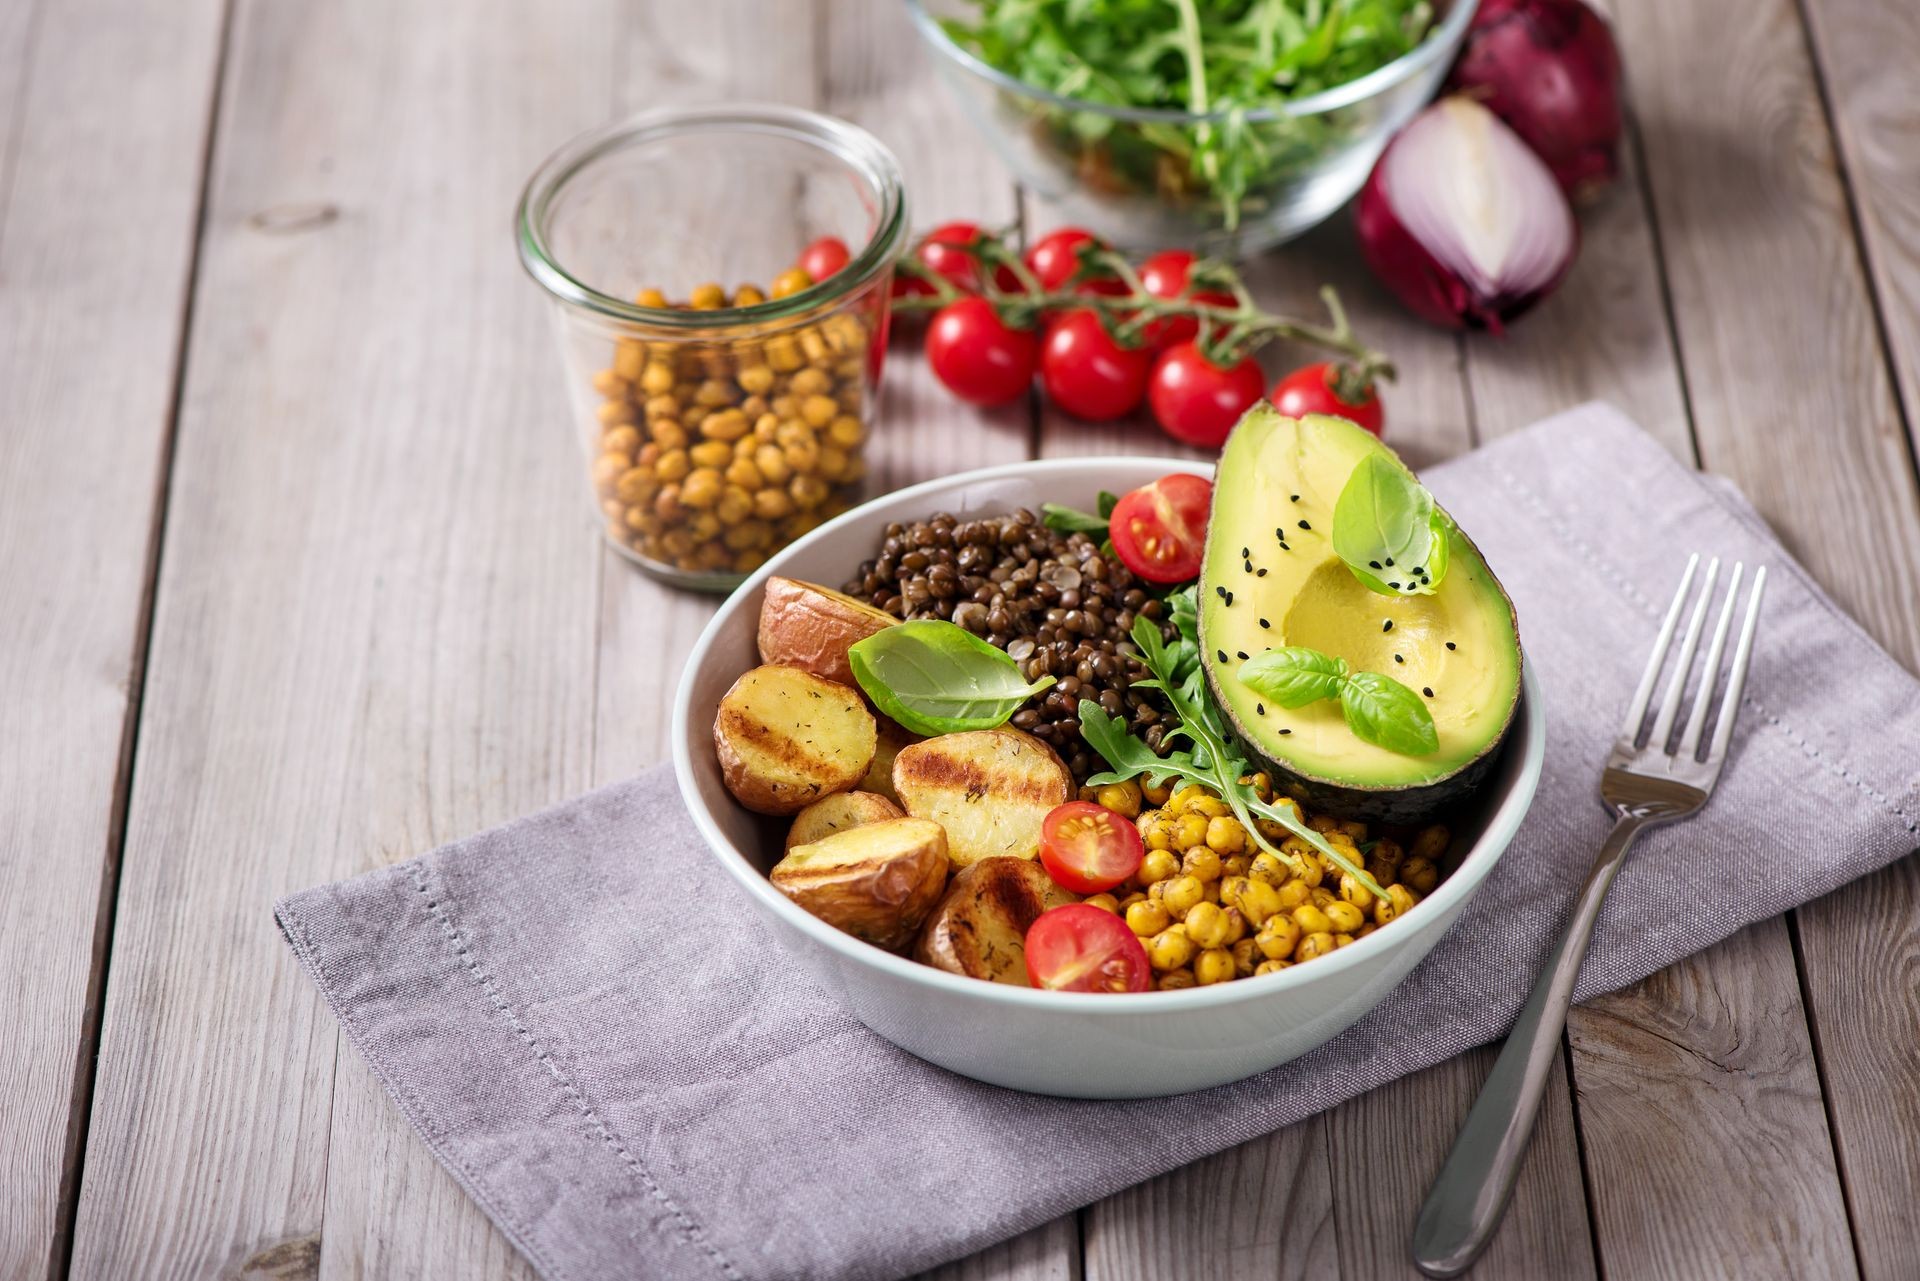 Buddha bowl with baked potatoes, lentils and spicy chickpeas, avocado, arugula, vegan, vegetarian healthy food 